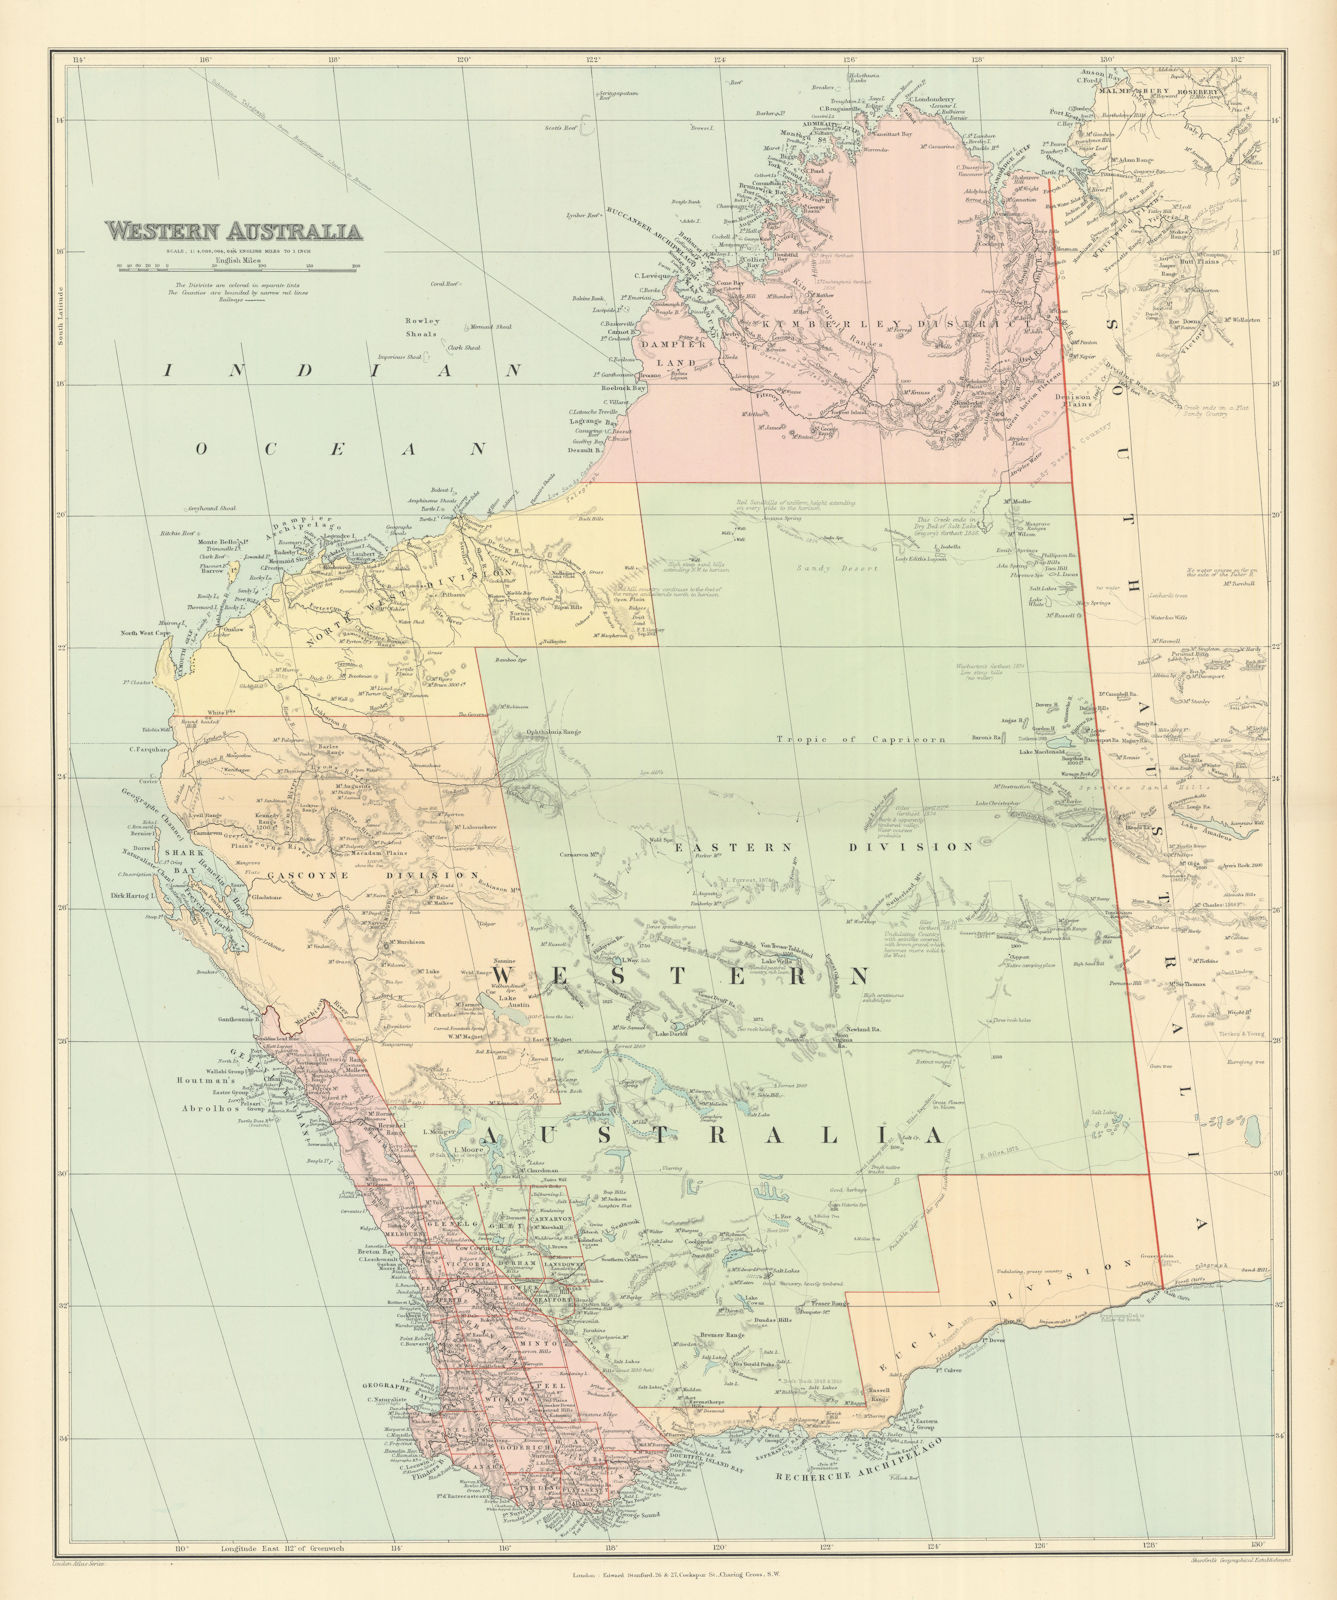 Western Australia. Districts. Explorers' routes. Large 66x55cm STANFORD 1894 map